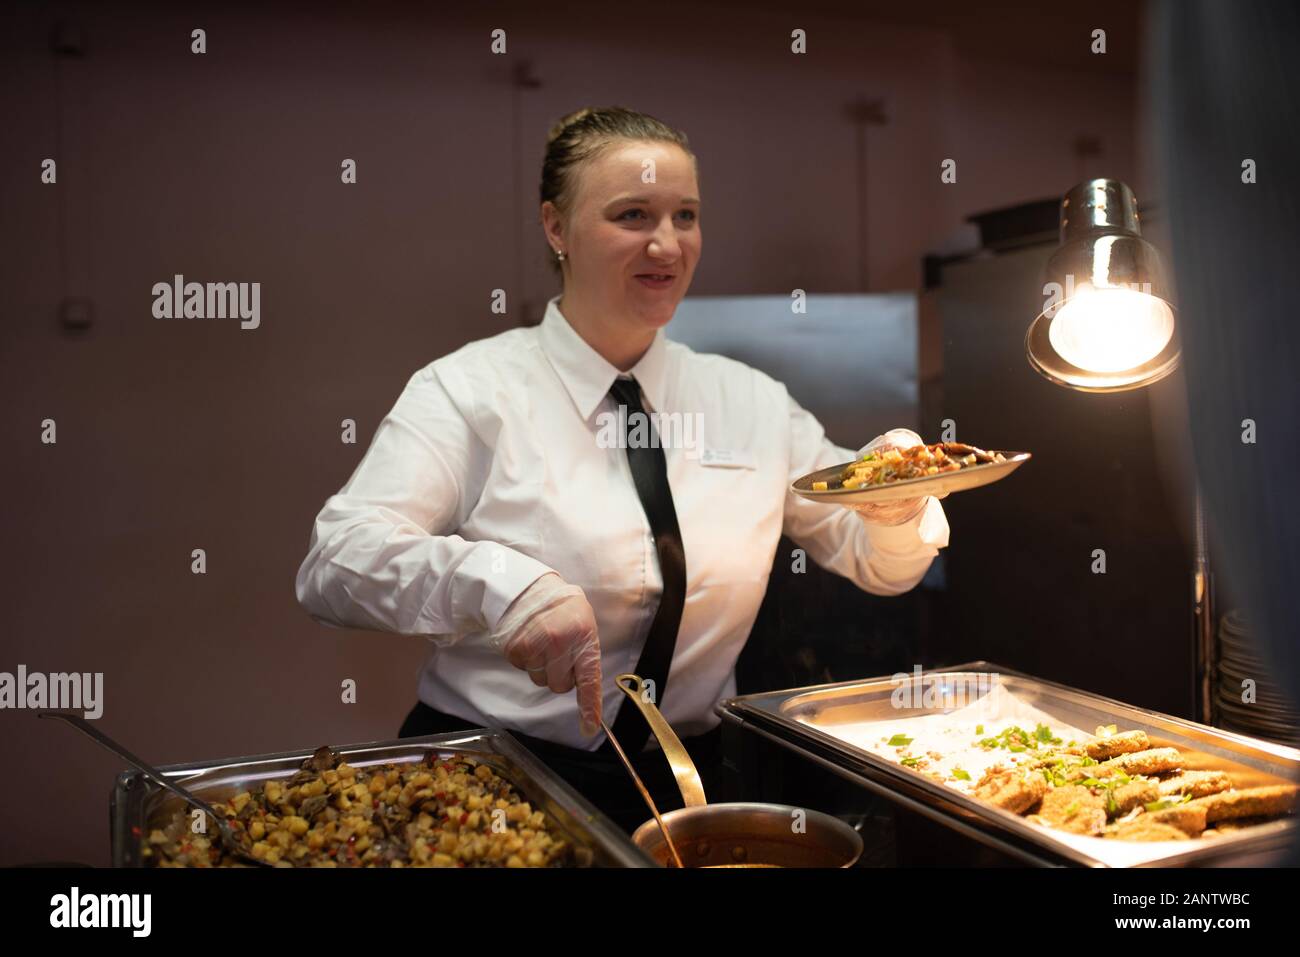 Munich, Germany. 19th Jan, 2020. An employee of Dallmayer Catering serves food to a guest at DLD Munich Conference 2020, Europe's big innovation conference, Alte Kongresshalle, Munich, January 18- 20, 2020 Picture Alliance for DLD/Hubert Burda Media | usage worldwide Credit: dpa/Alamy Live News Stock Photo